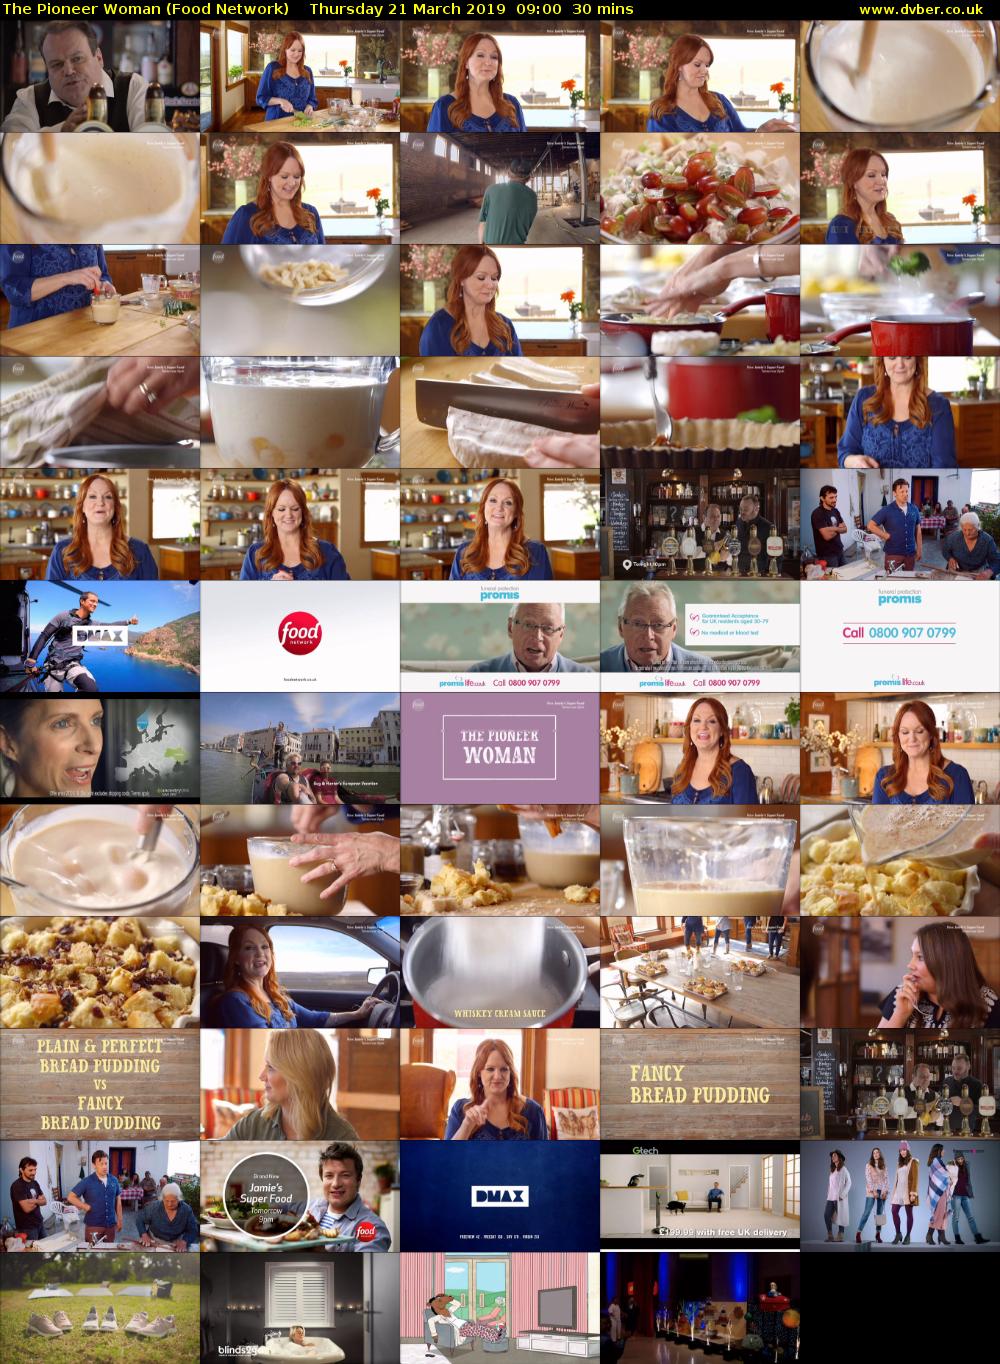 The Pioneer Woman (Food Network) Thursday 21 March 2019 09:00 - 09:30